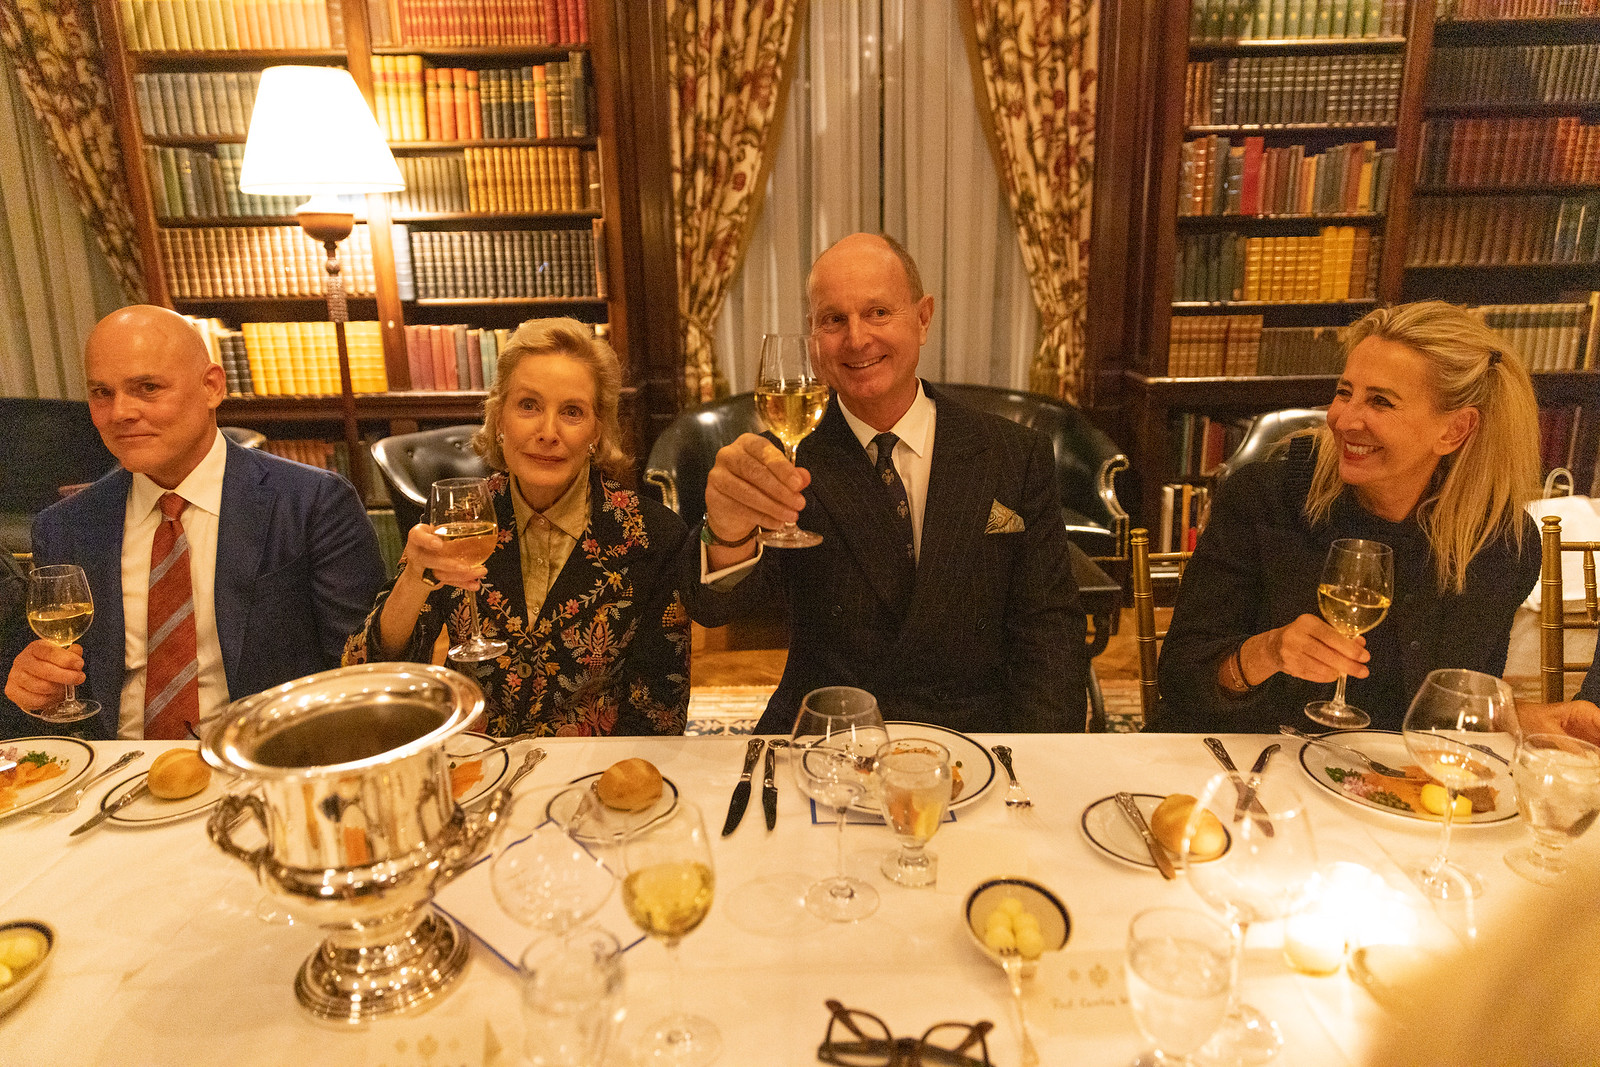 2021 Savoy History Series Patrons' Dinner Hosted by HRH Prince Dimitri of Yugoslavia and The American Foundation of Savoy Orders (Savoy Foundation), November 4, 2021